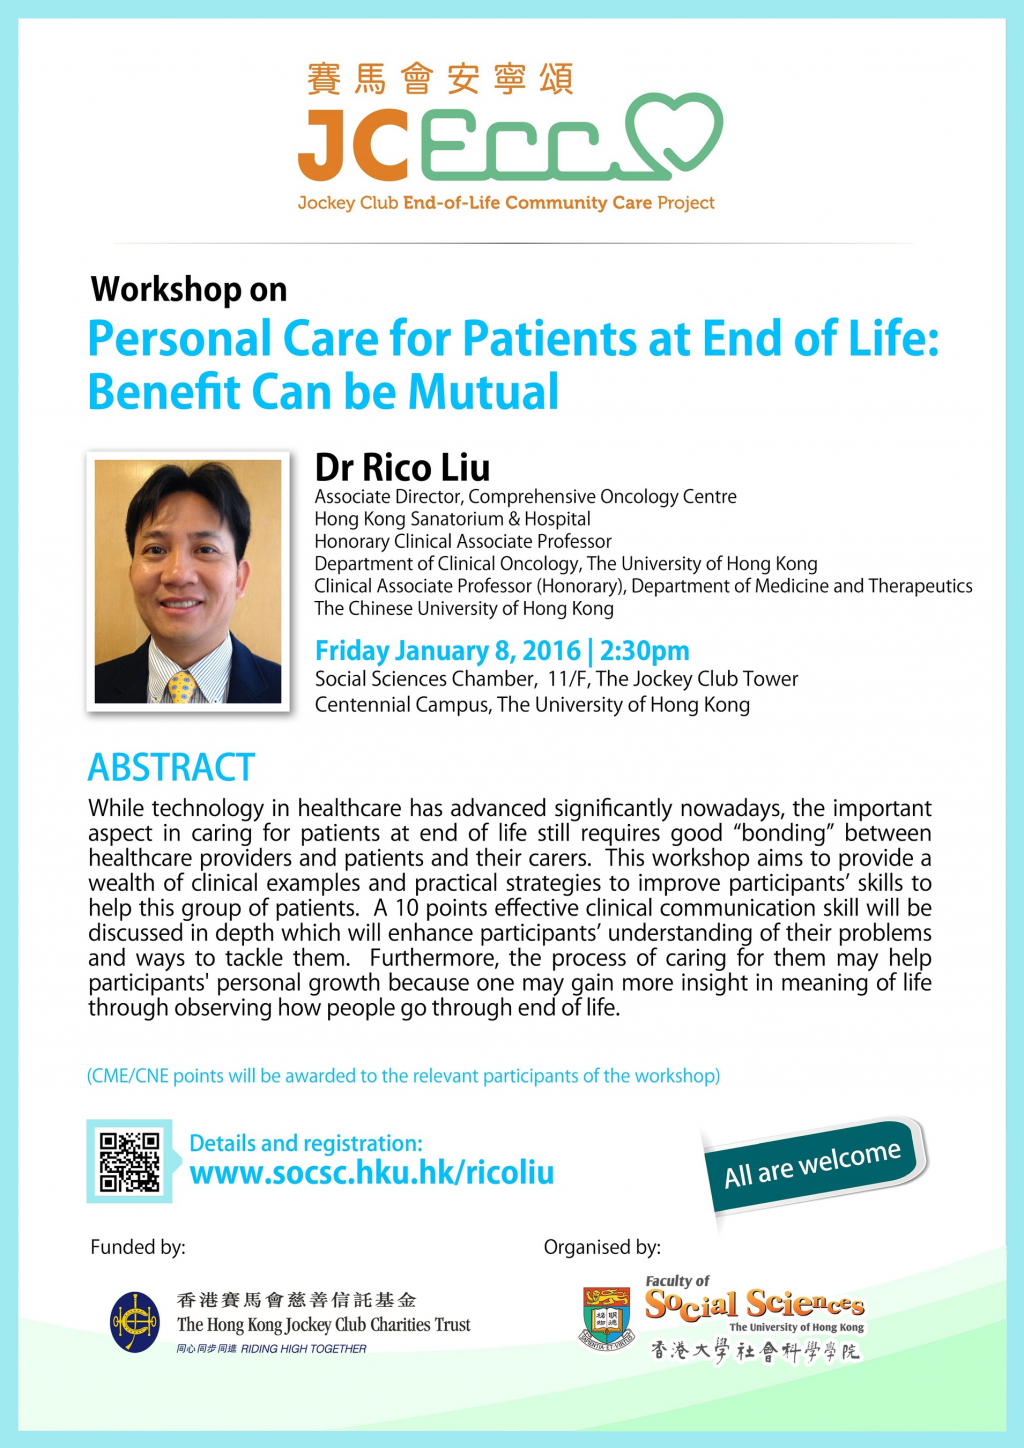 Workshop on Personal Care for Patients at End of Life: Benefit Can Be Mutual